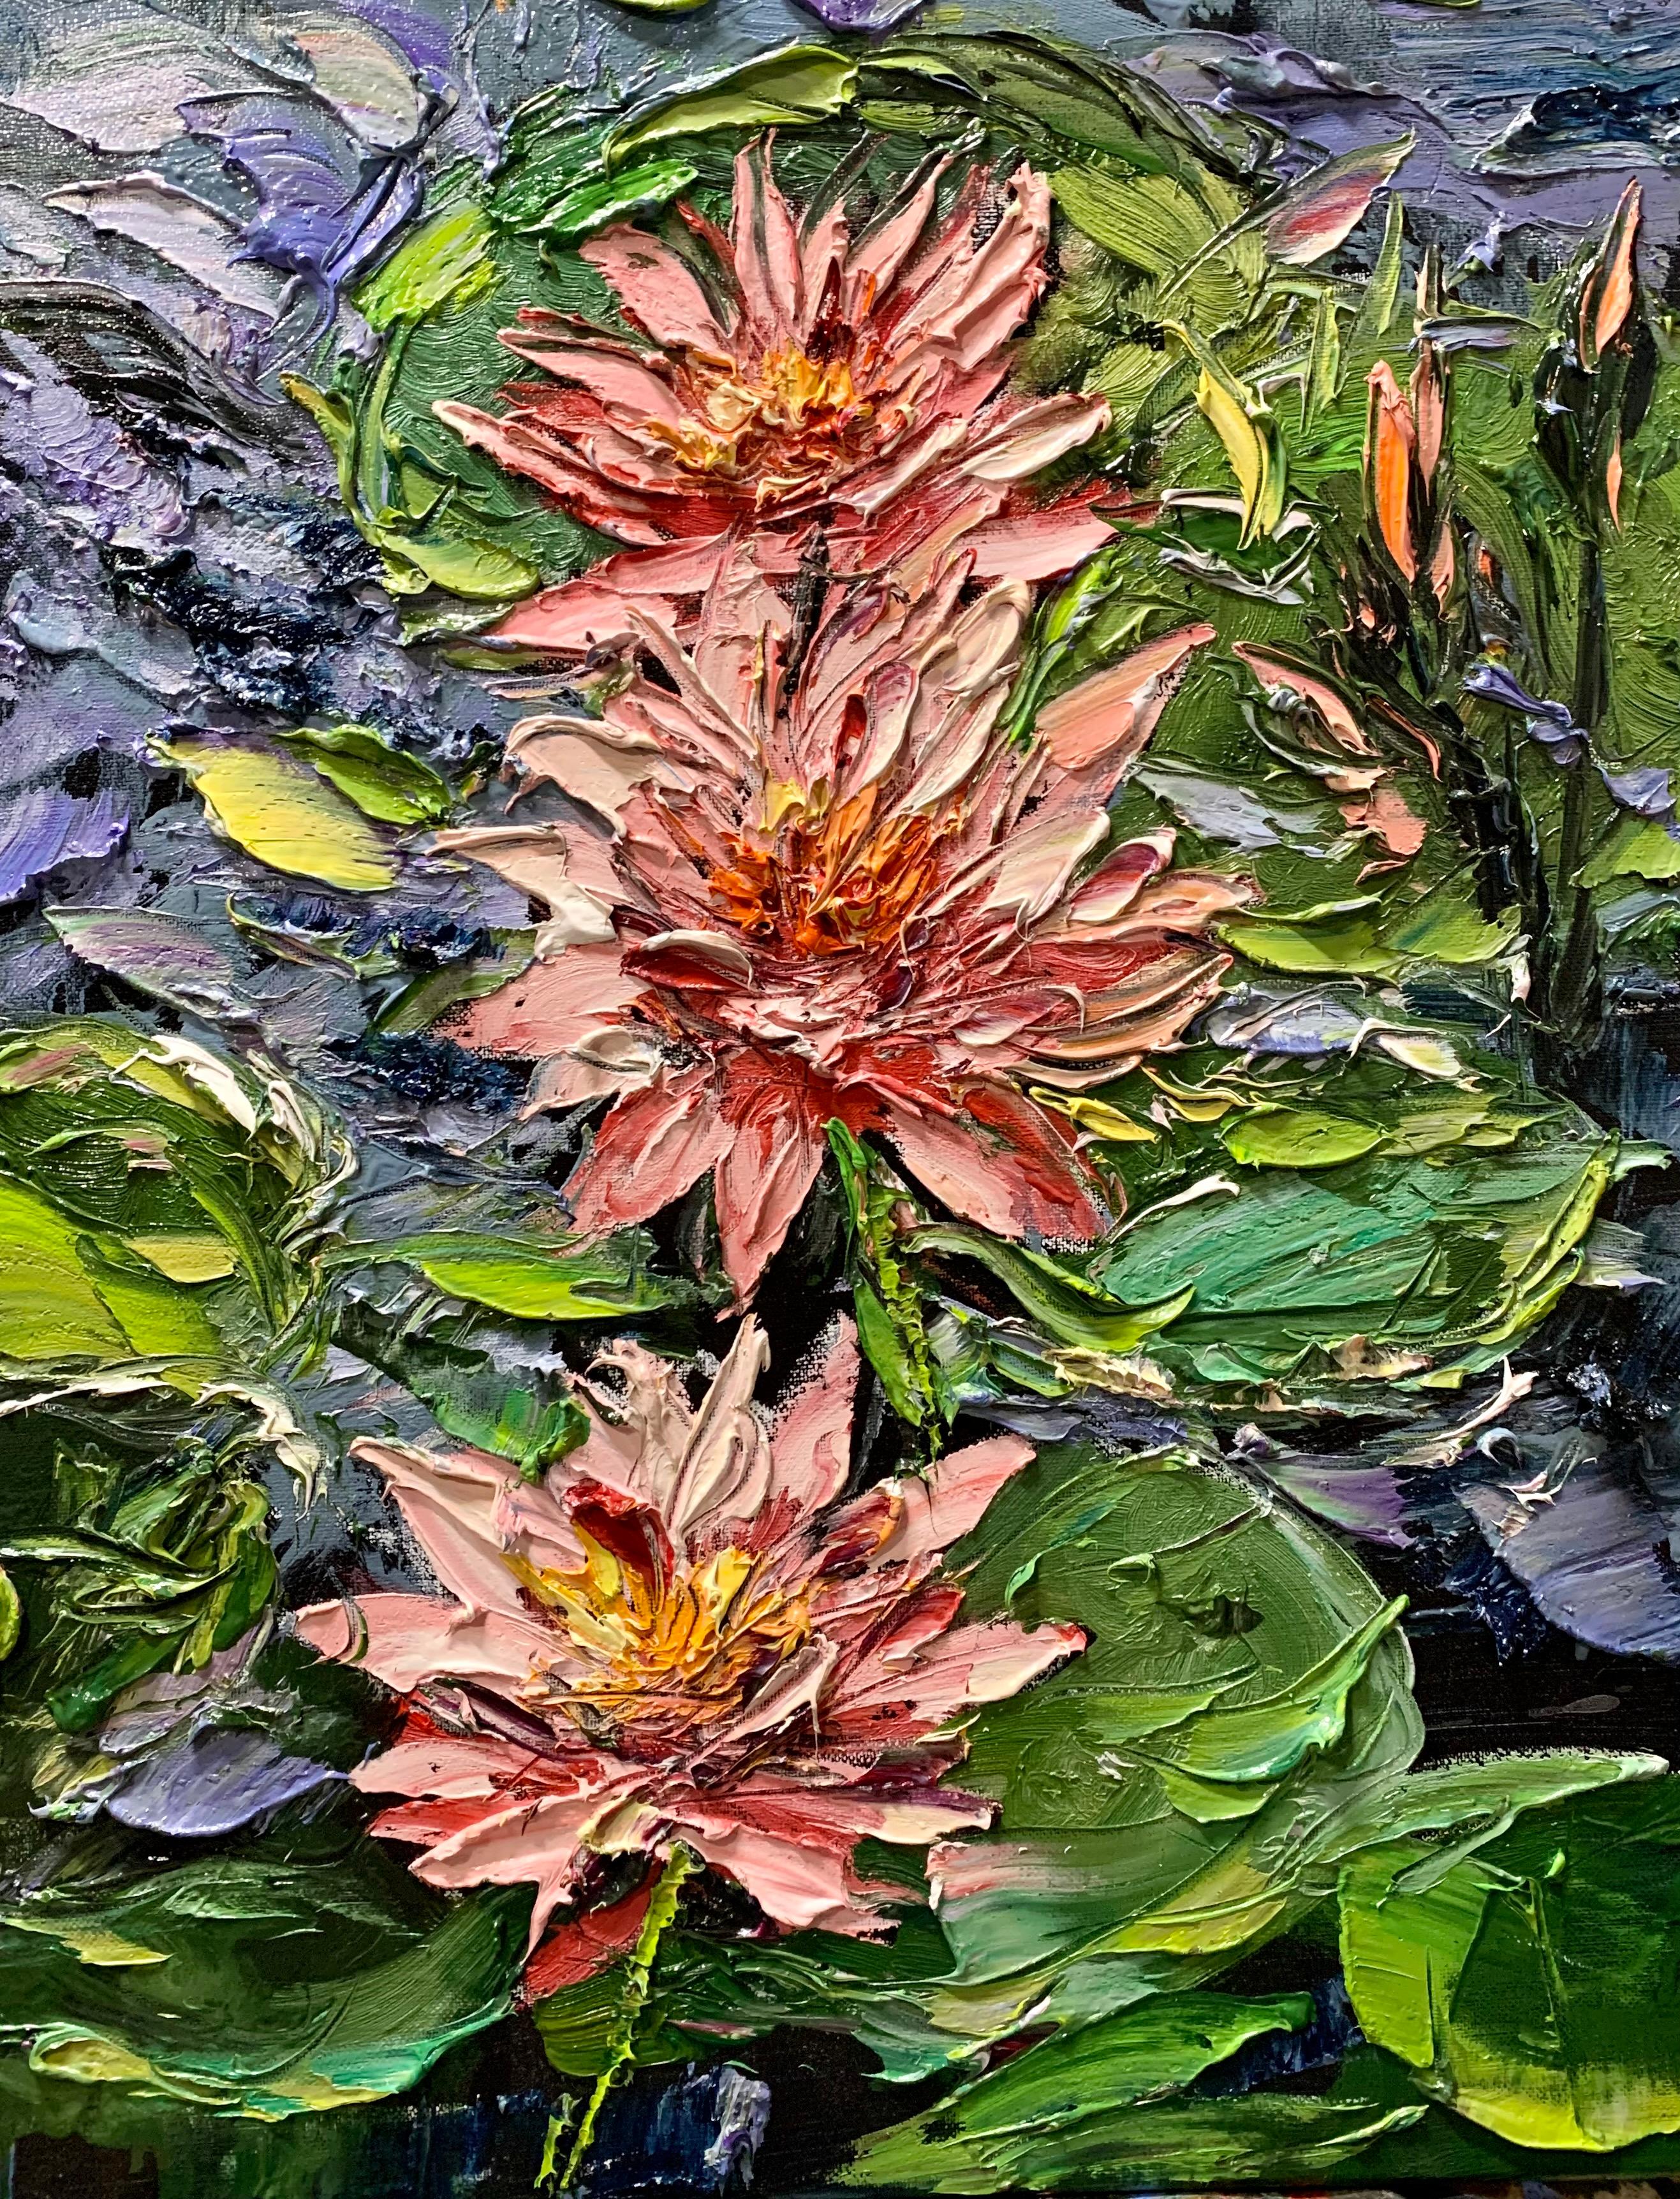 artist who painted water lilies